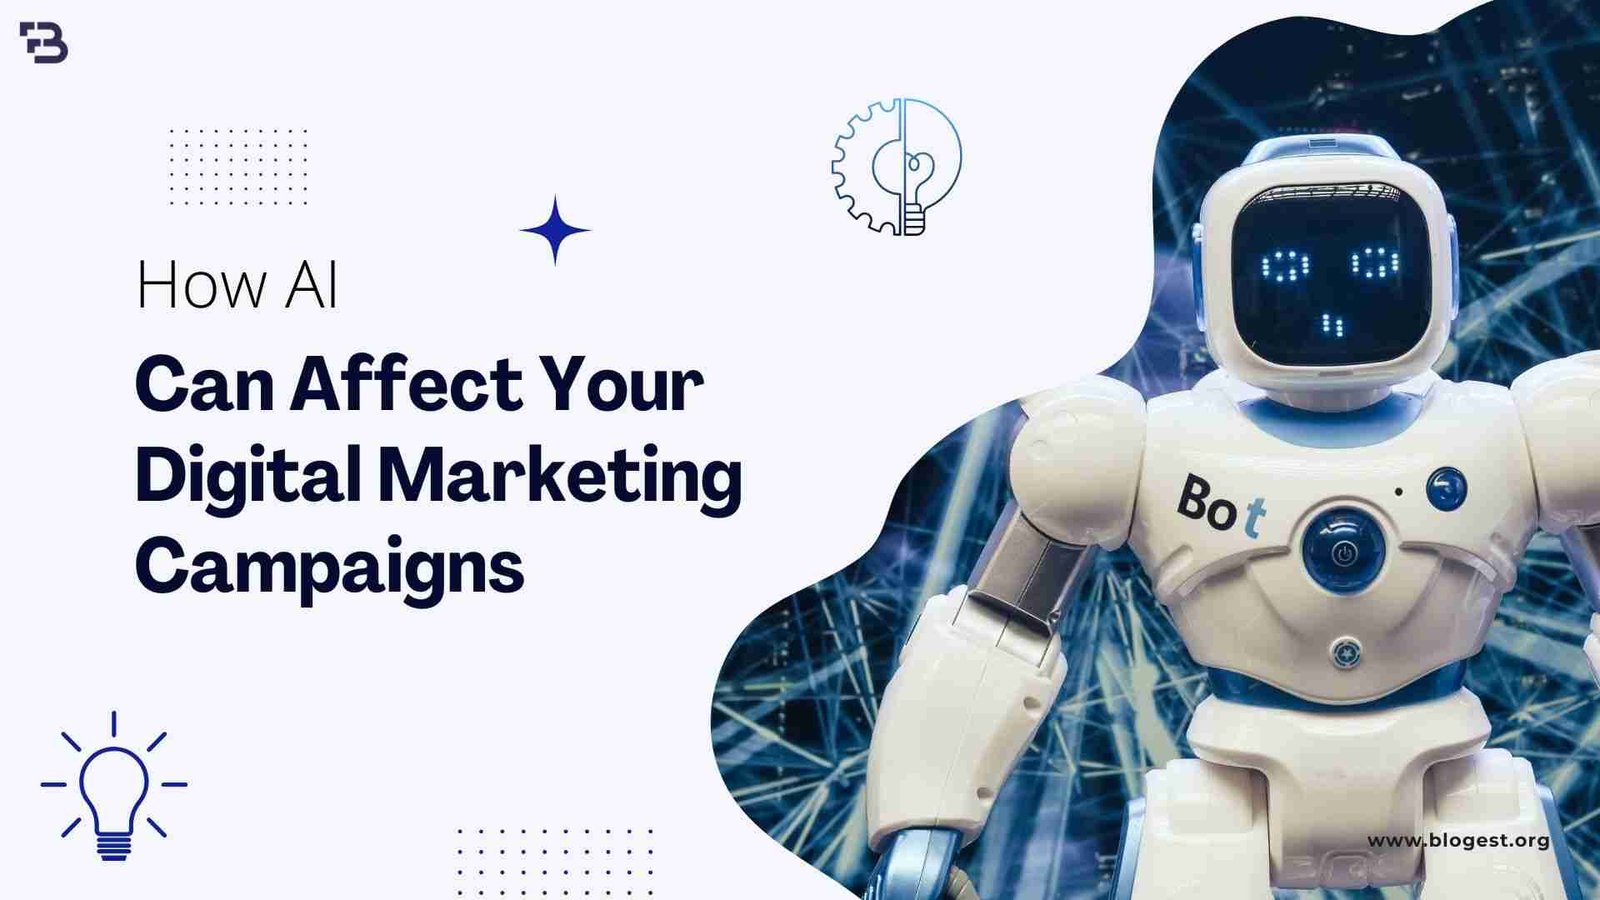 How AI Can Affect Your Digital Marketing Campaigns